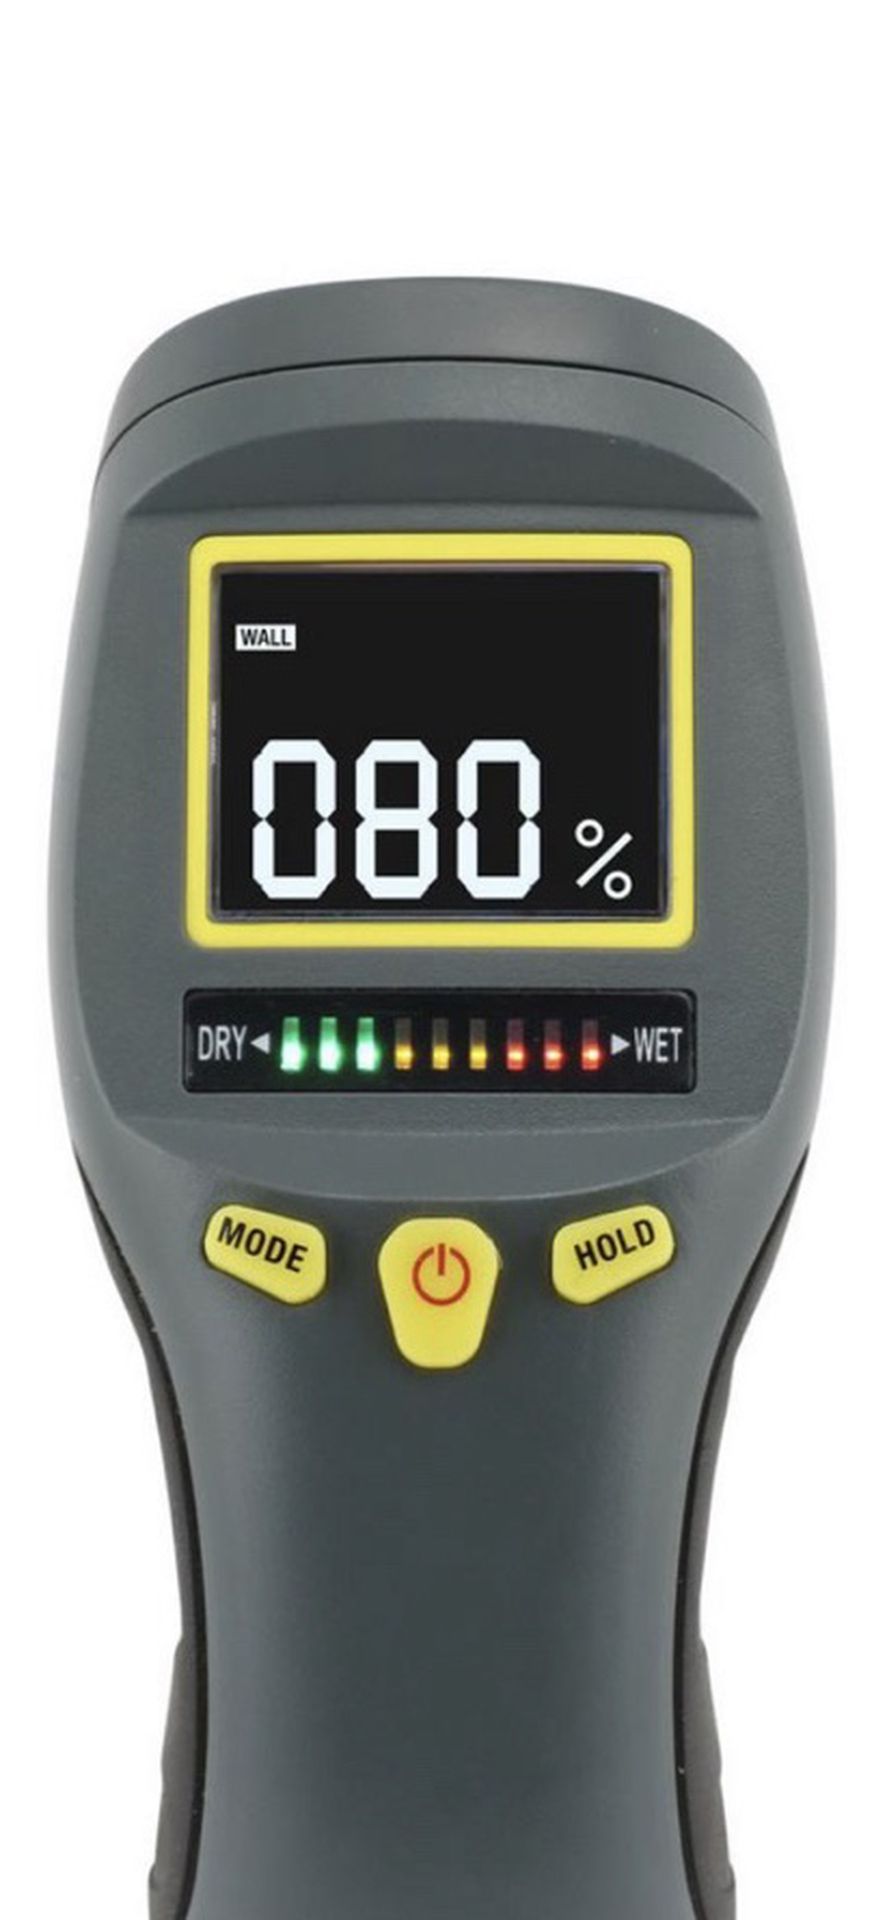 General Tools Professional Digital Pinless Moisture Meter with Backlit LCD